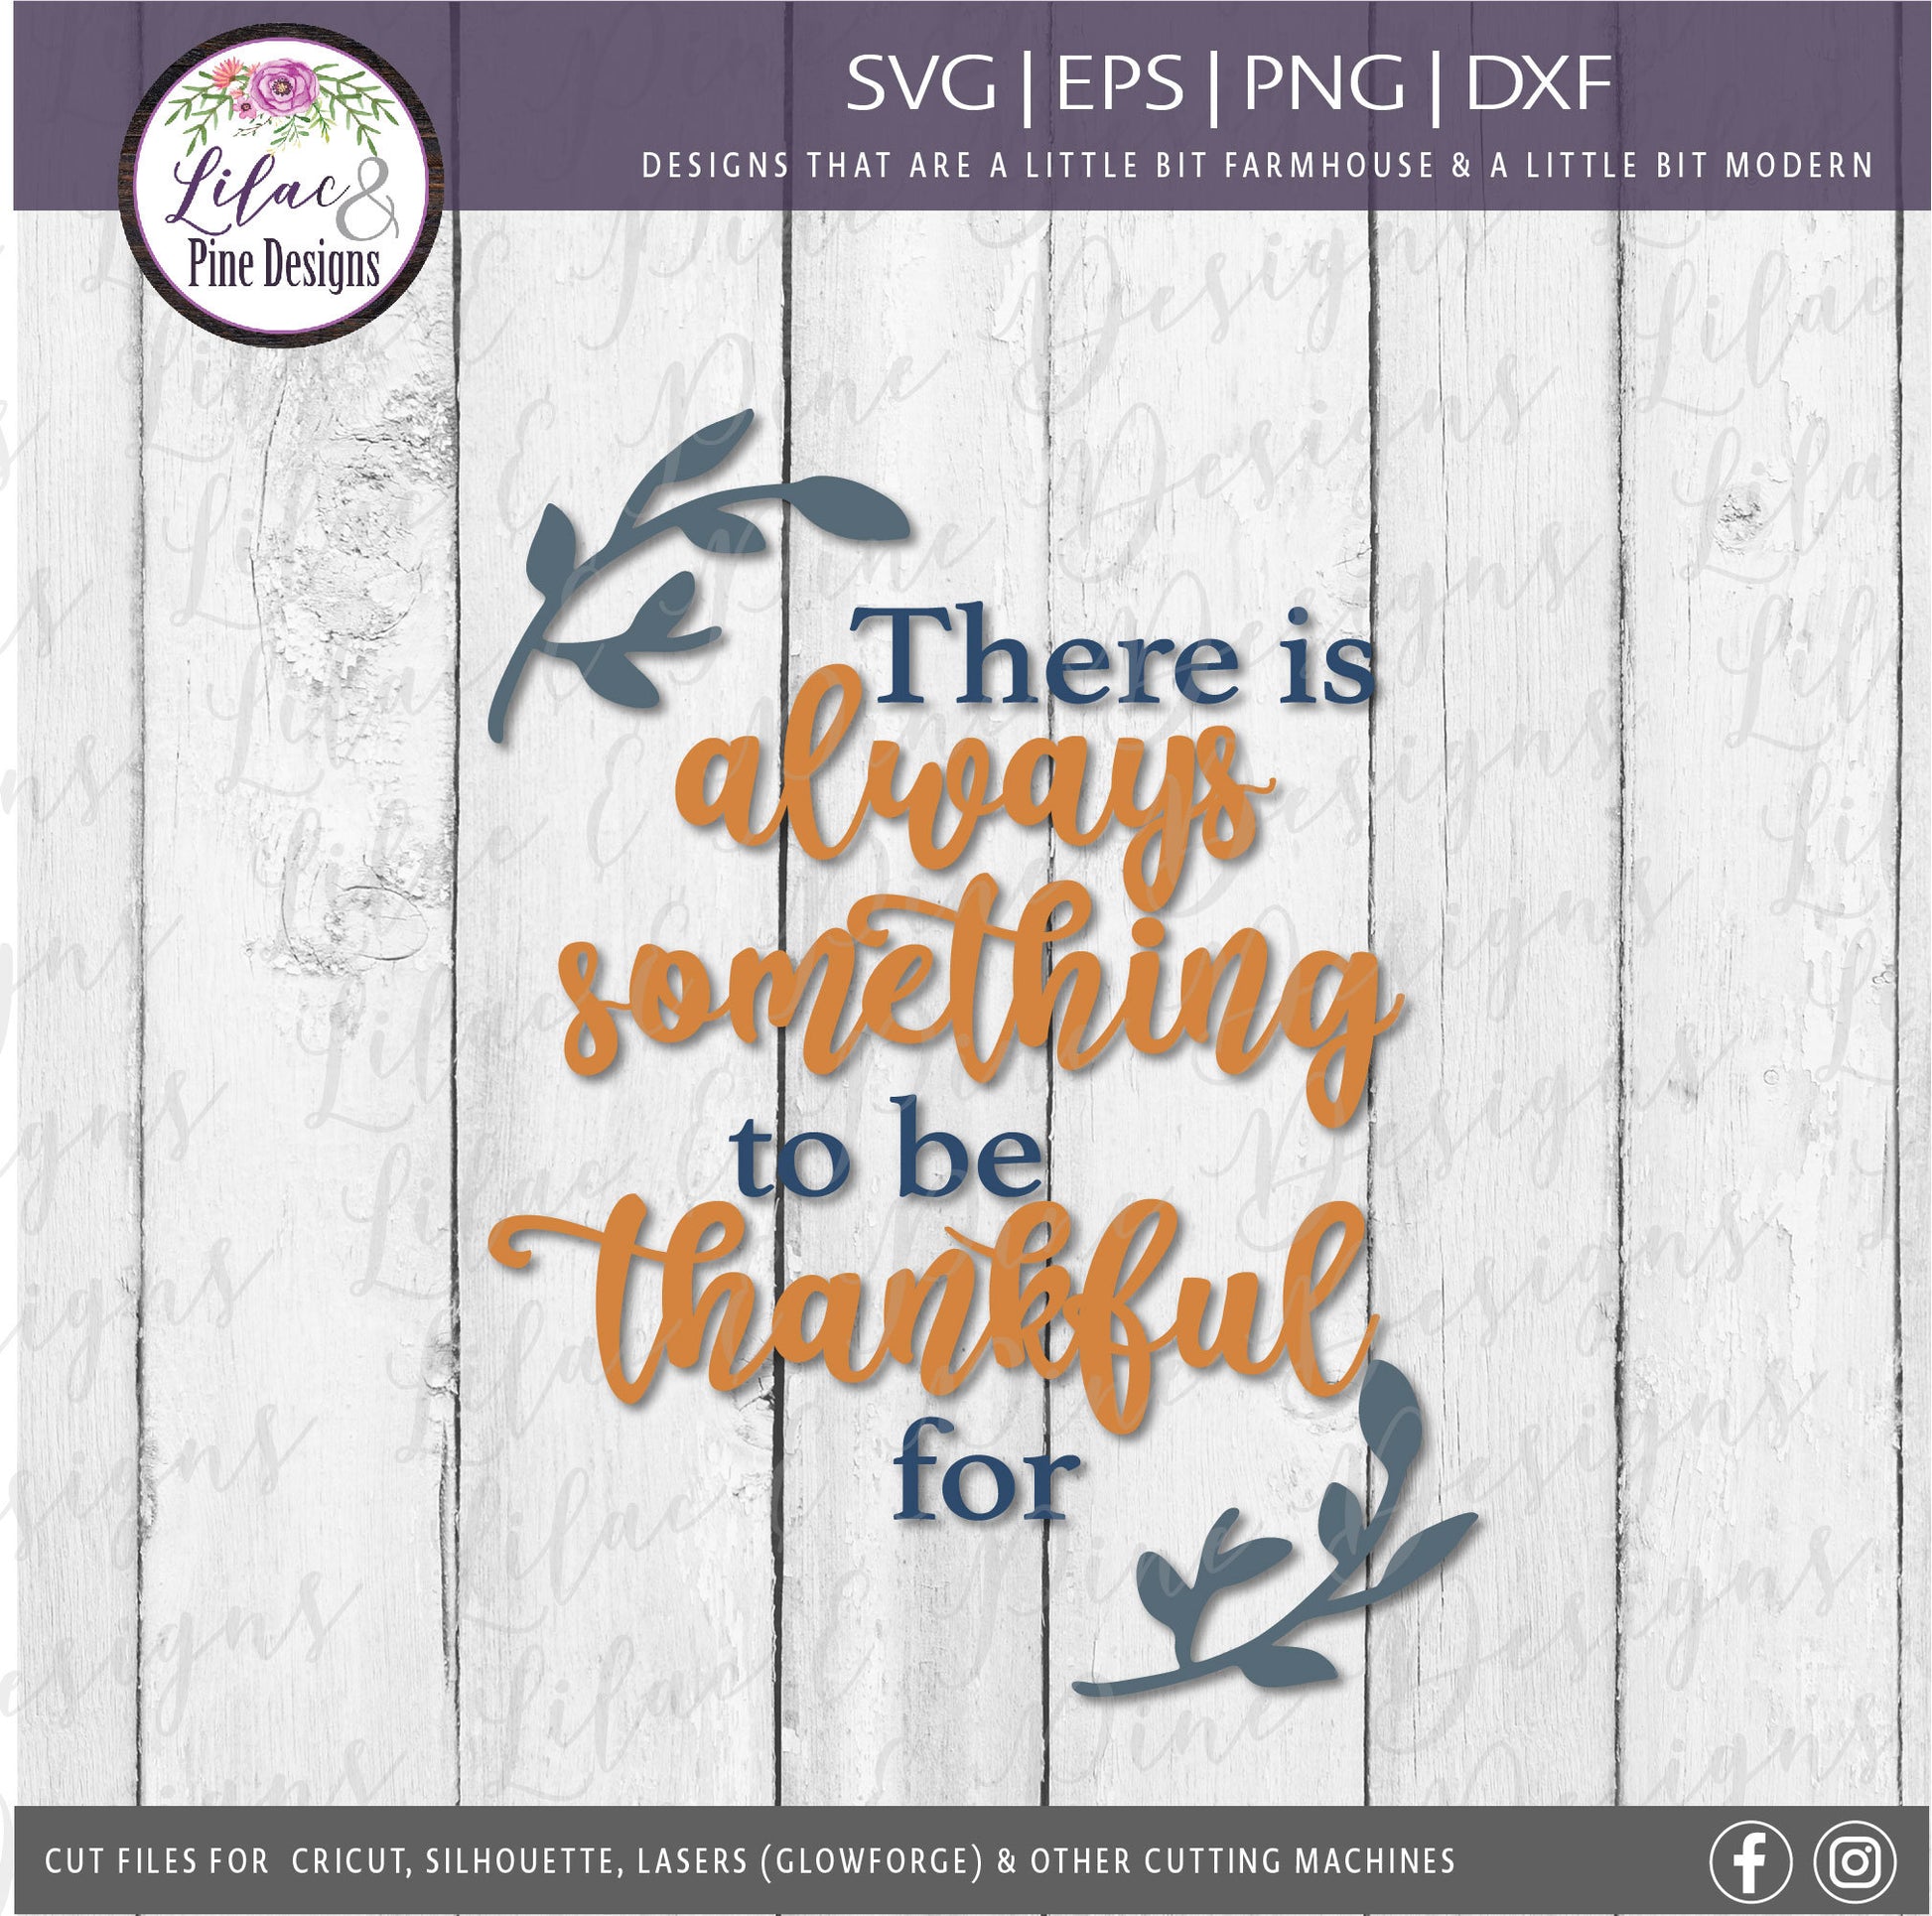 Fall SVG, autumn SVG, Thankful quote, Thanksgiving Svg, Farmhouse Svg, Fall decor, Cricut cut file, Glowforge Svg files, Dxf files for laser